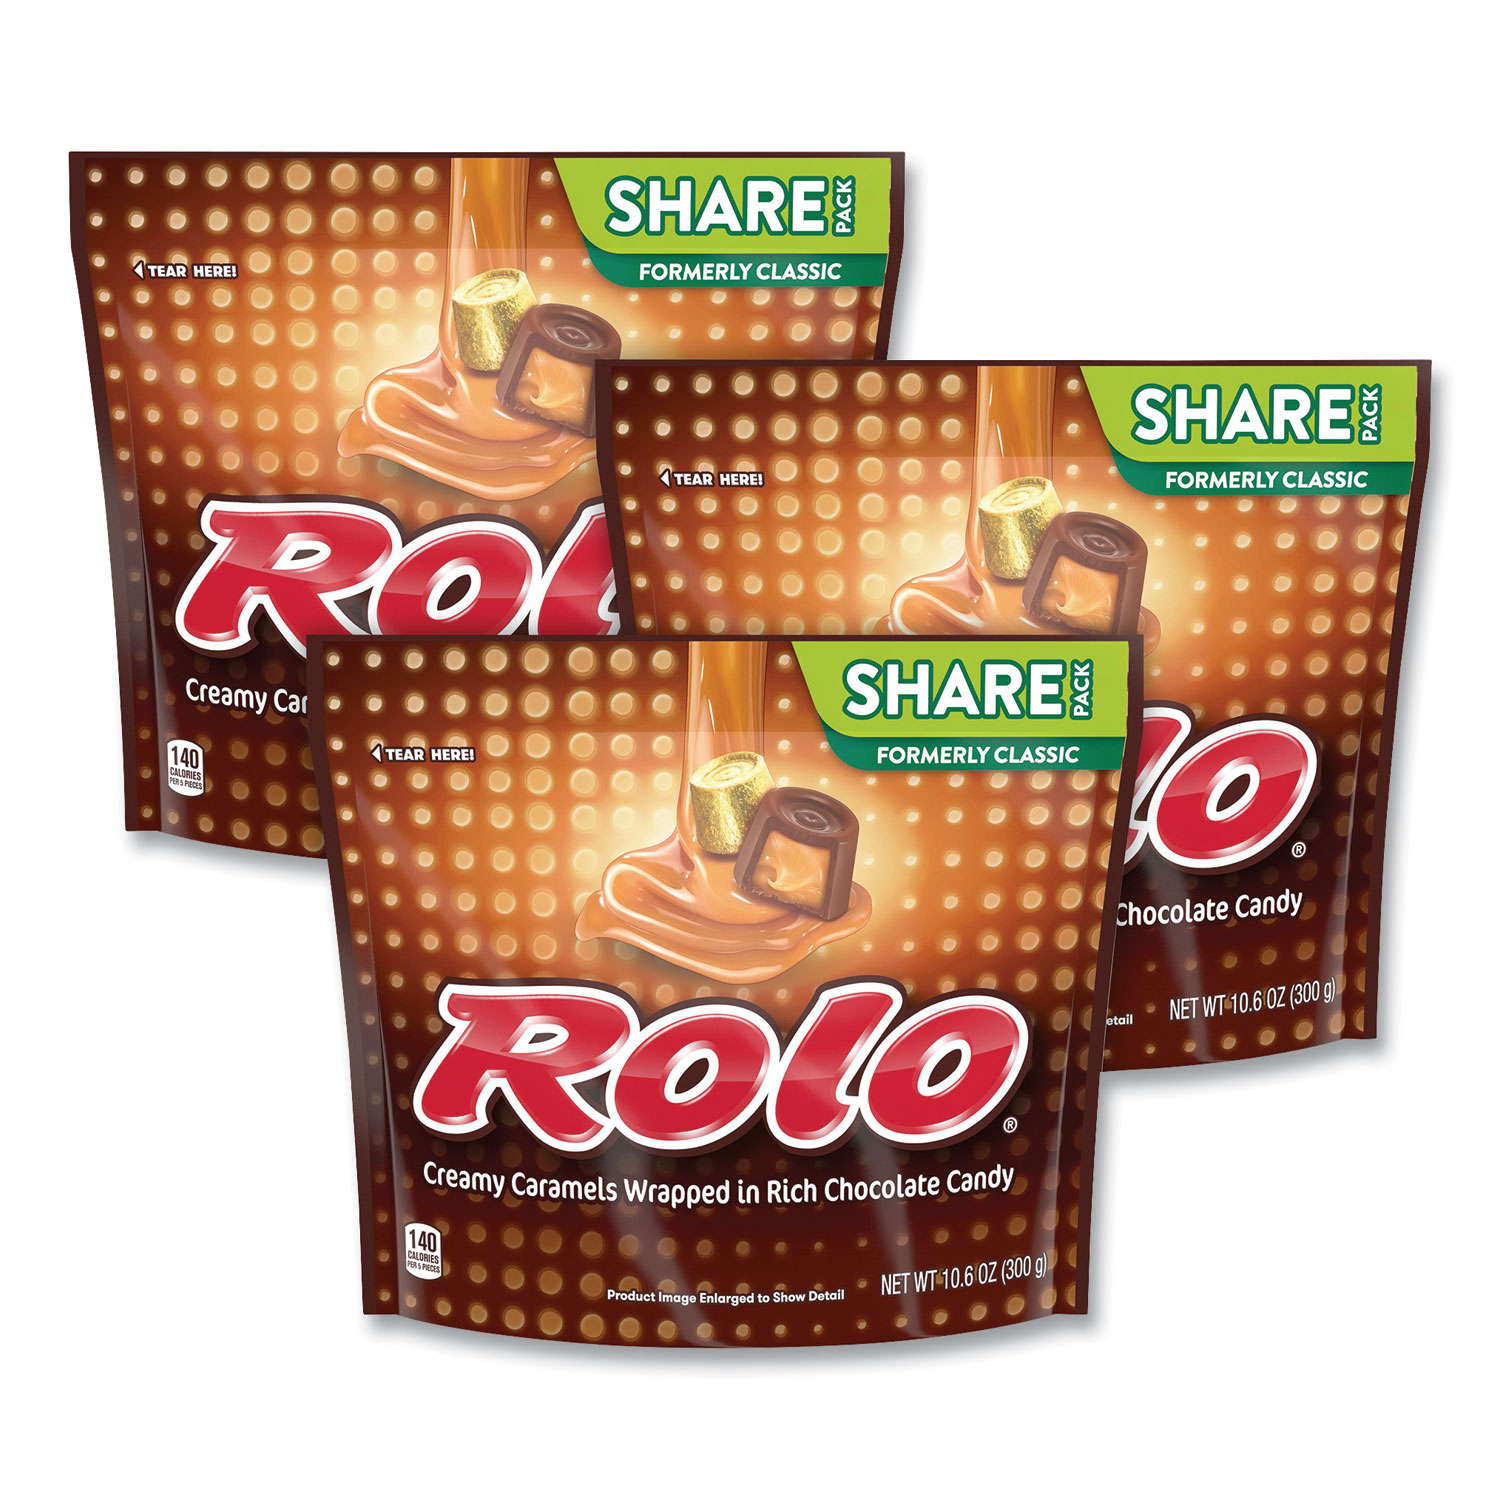  ROLO 37924 Share Pack Creamy Caramels Wrapped in Rich Chocolate Candy, 10.6 oz Bag, 3 Bags/Pack, Free Delivery in 1-4 Business Days (GRR24600435) 